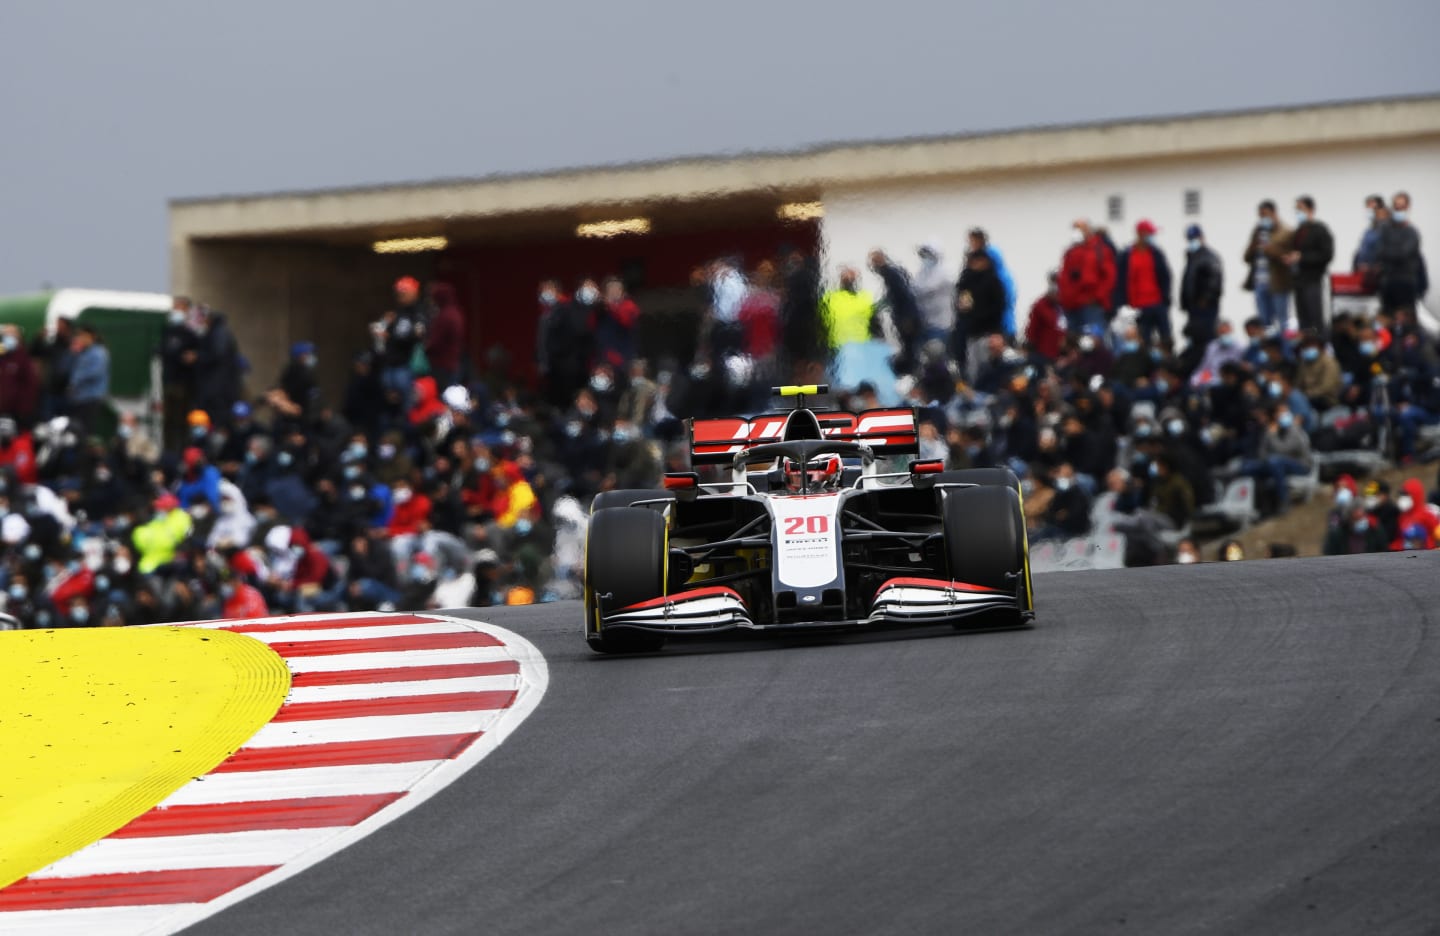 PORTIMAO, PORTUGAL - OCTOBER 25: Kevin Magnussen of Denmark driving the (20) Haas F1 Team VF-20